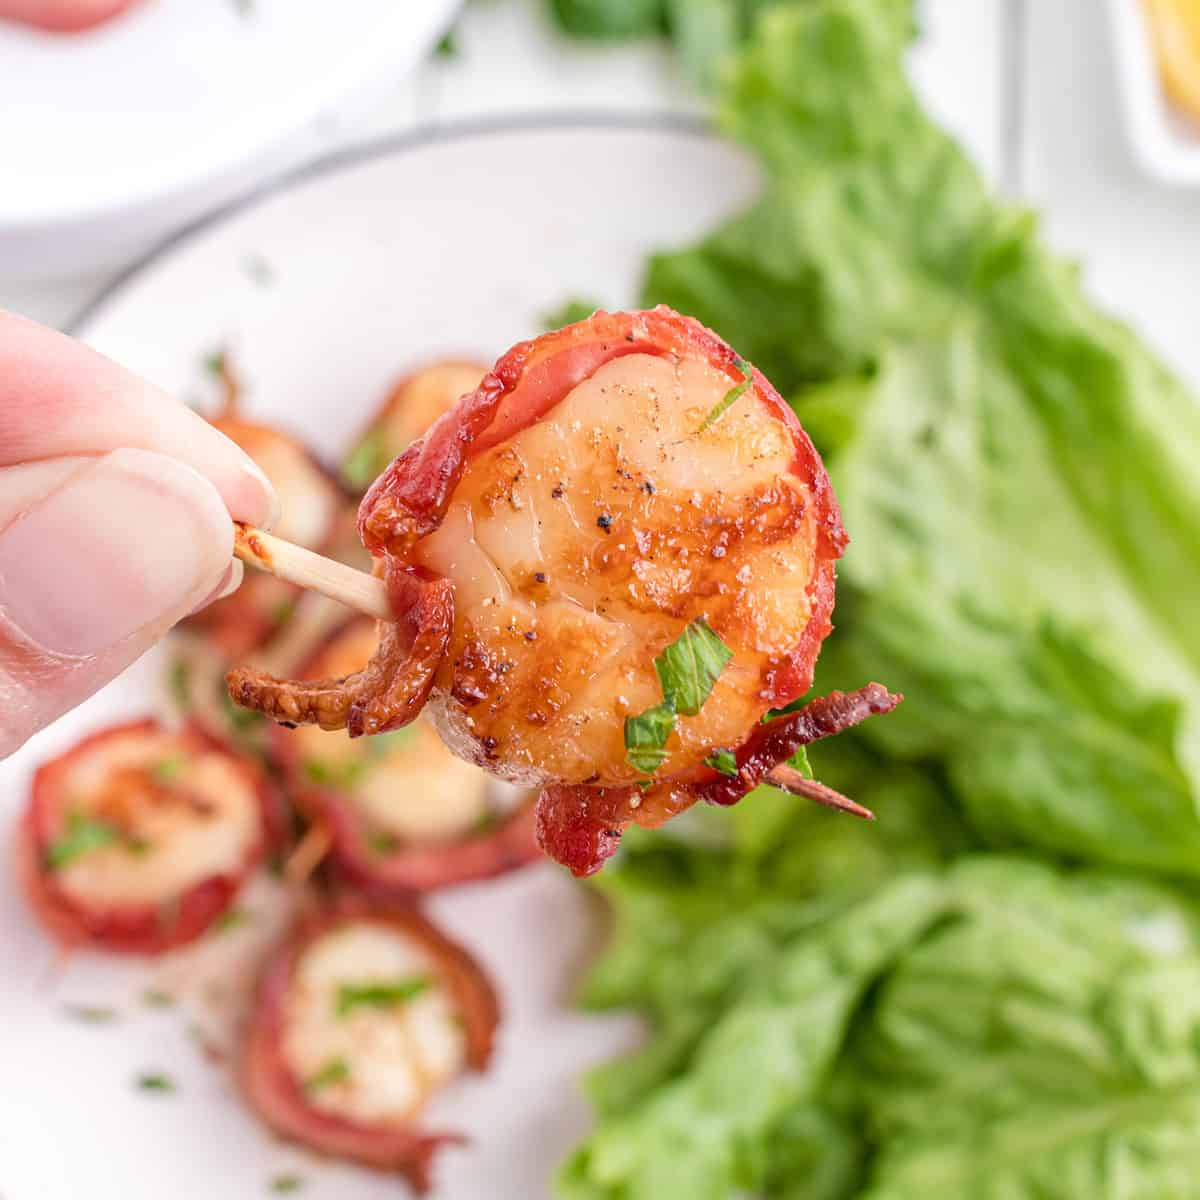 A bacon-wrapped scallop being picked up with a toothpick.